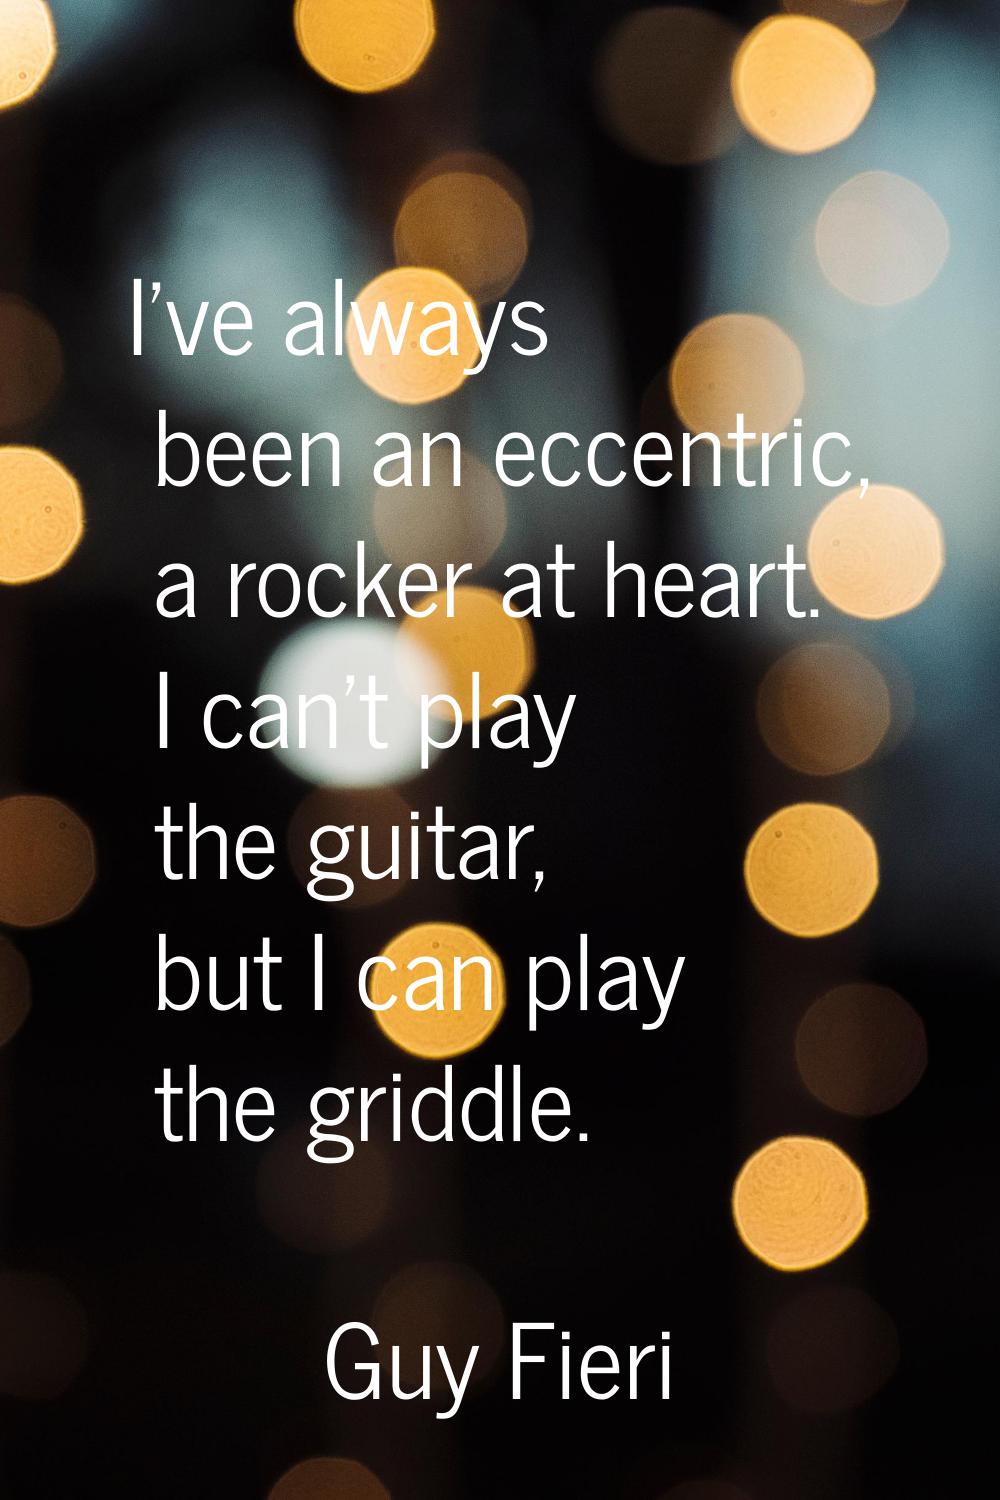 I've always been an eccentric, a rocker at heart. I can't play the guitar, but I can play the gridd